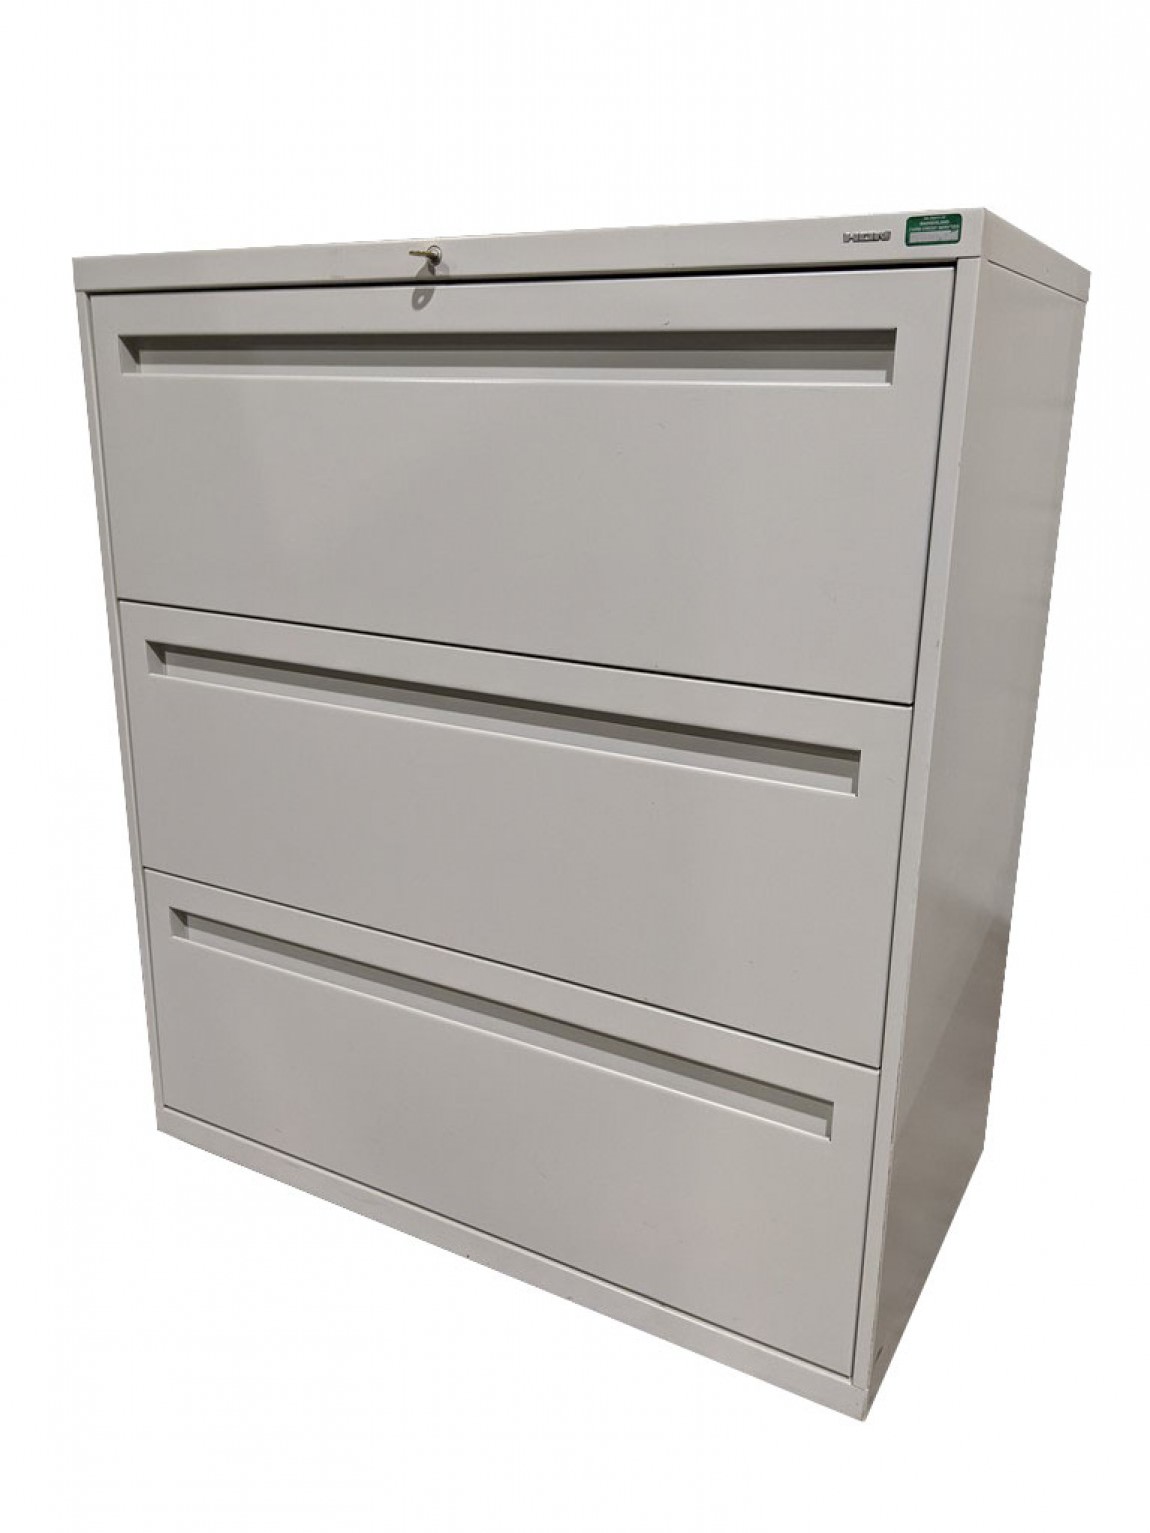 Putty Hon 3 Drawer Lateral Filing Cabinet – 36 Inch Wide